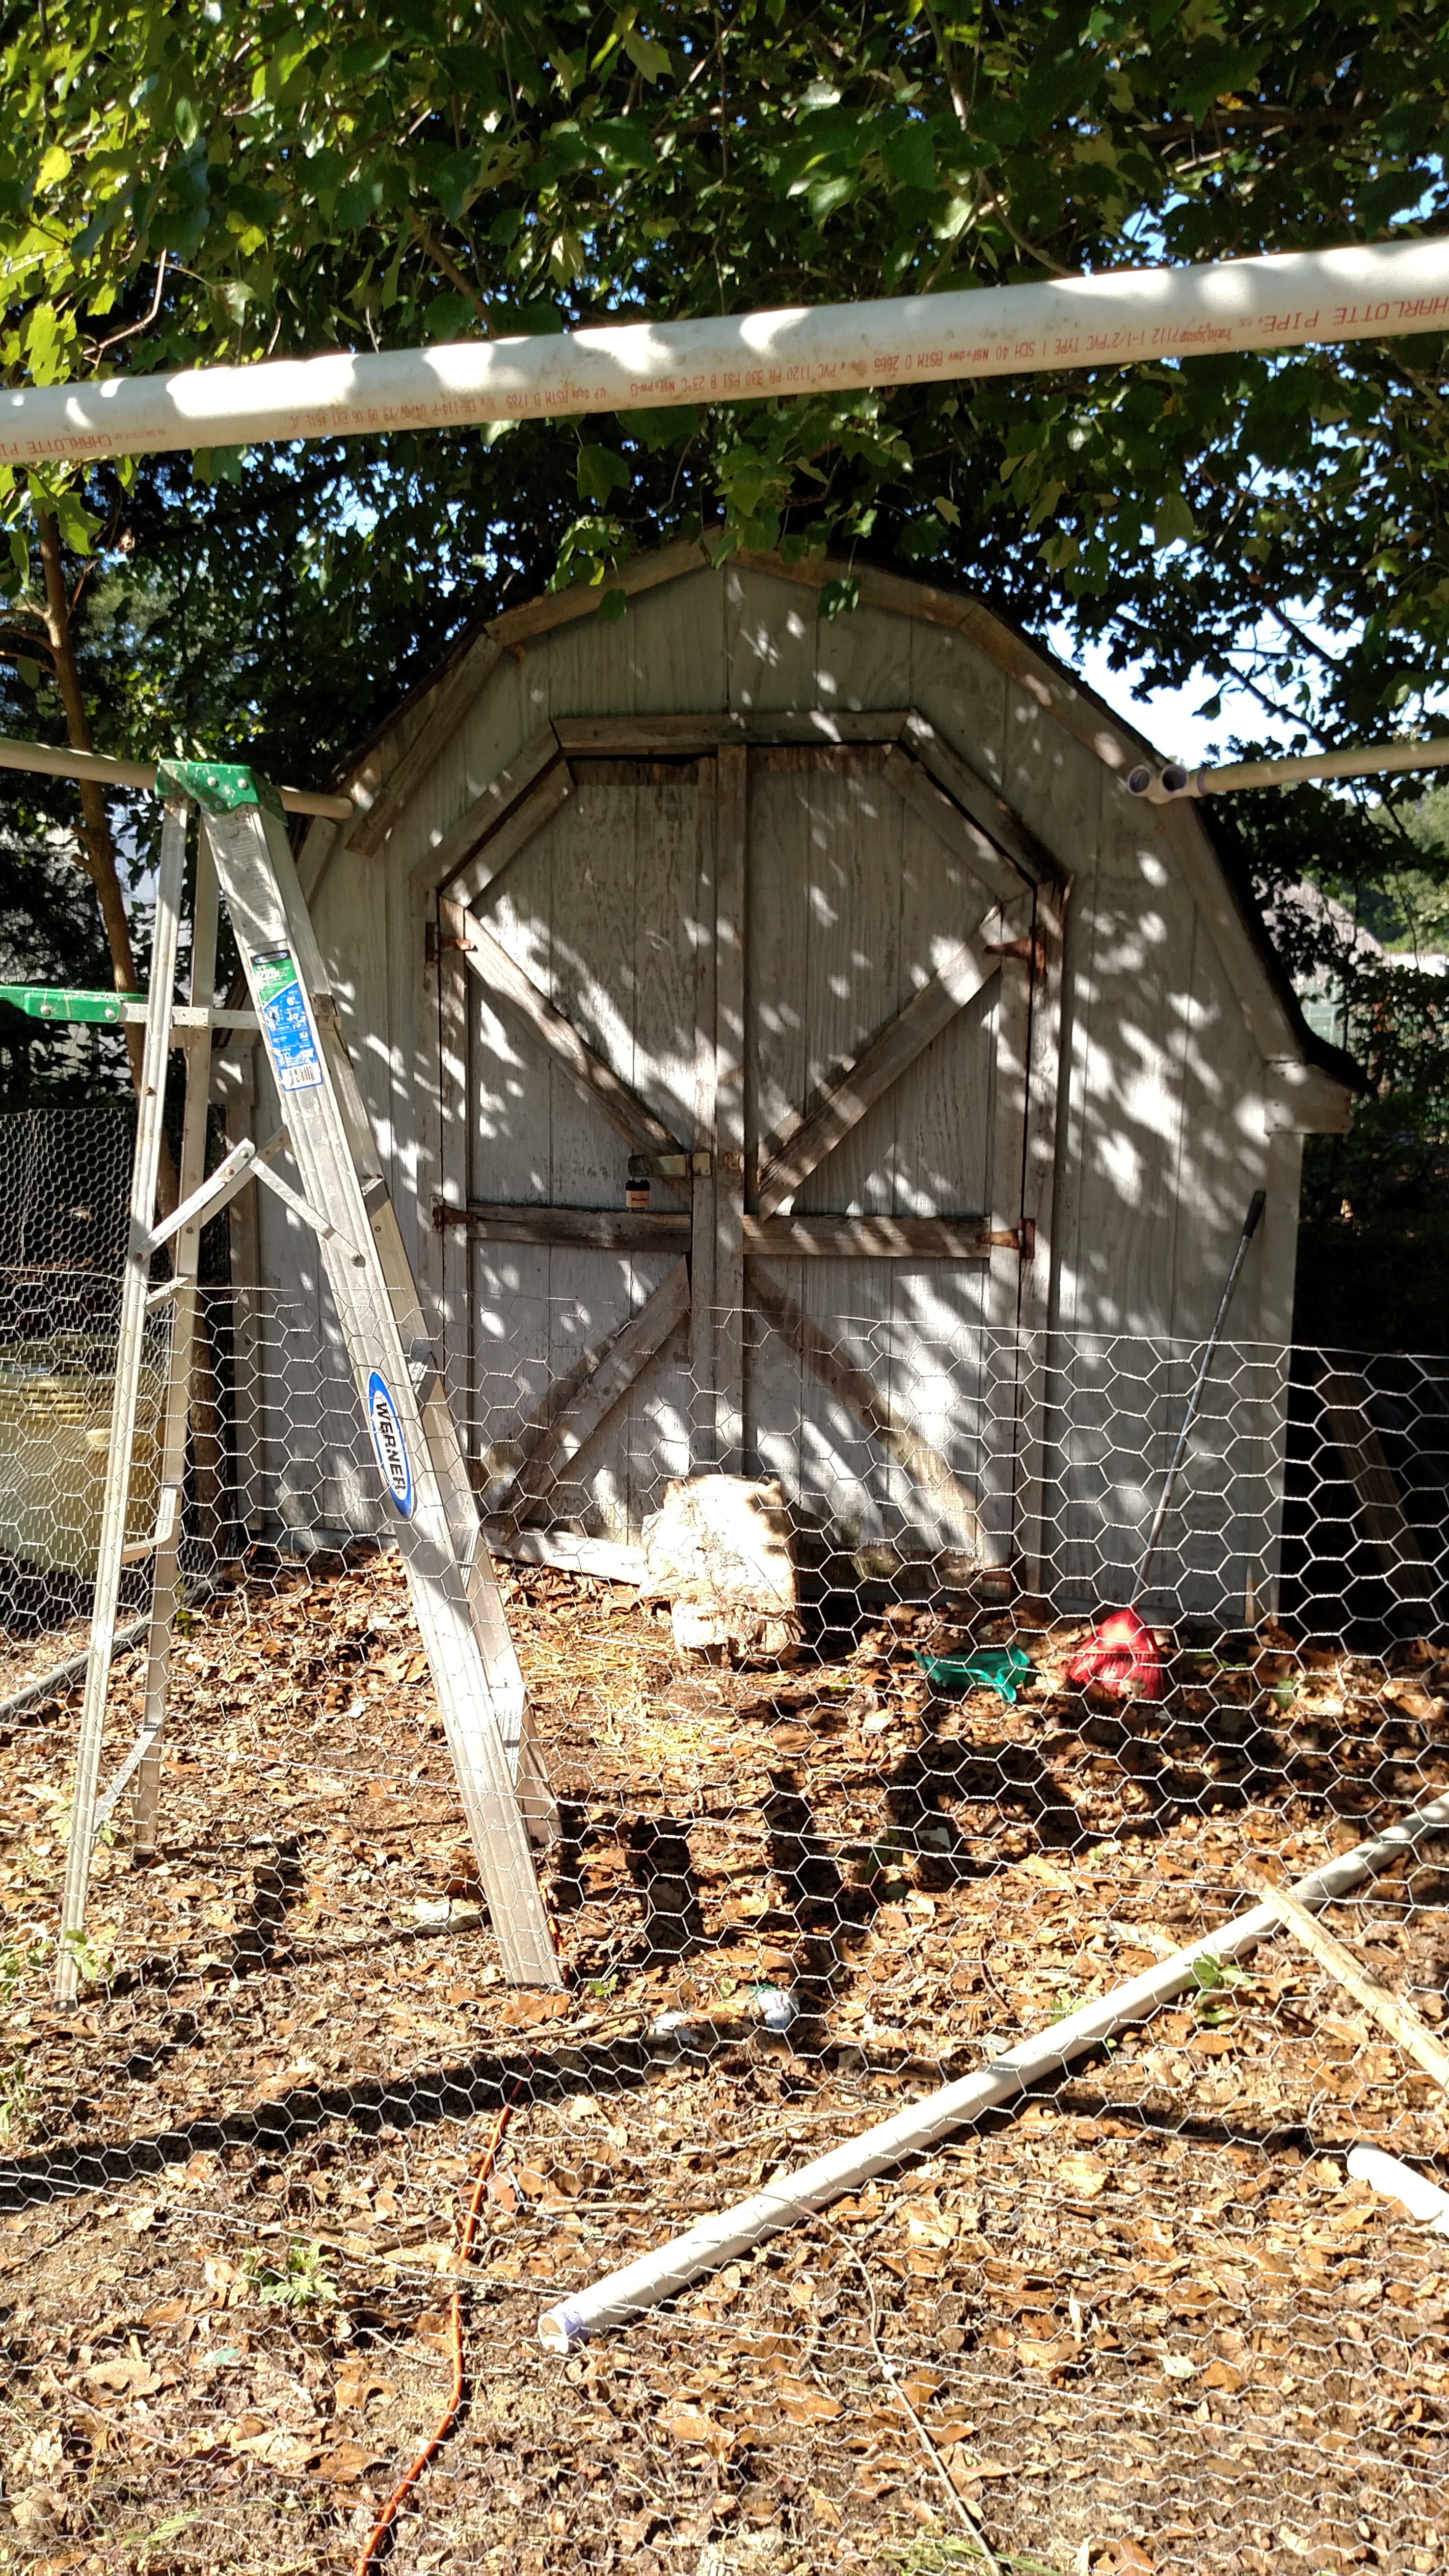 Shed in the process if conversion to a coop. 8/22/15